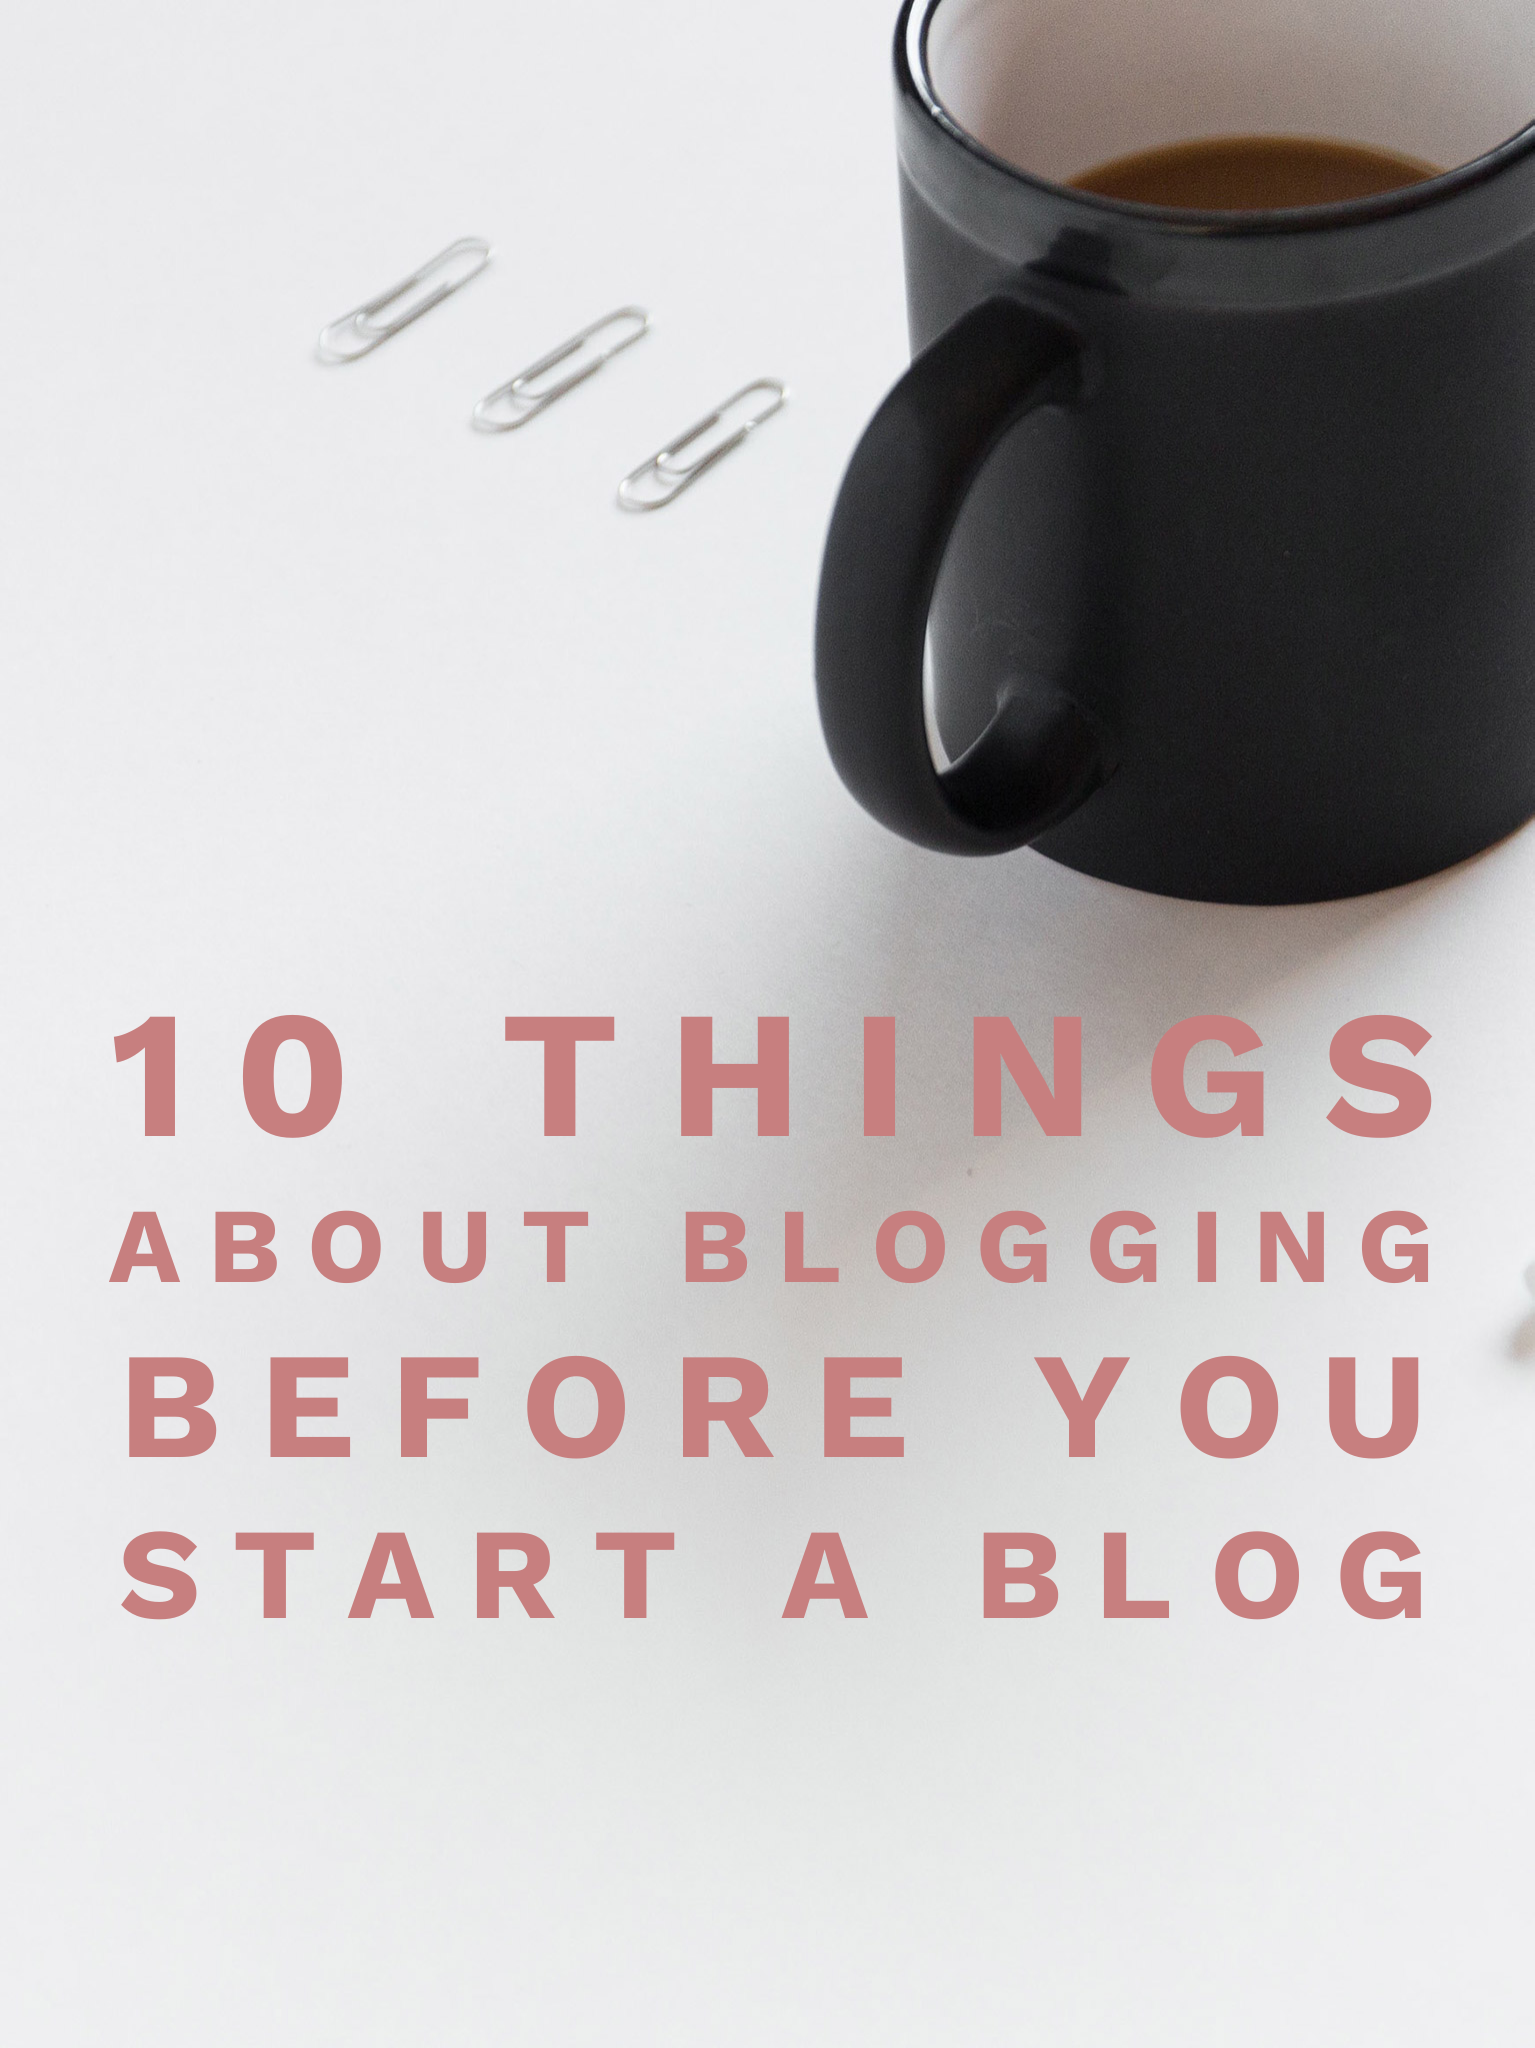 10 thins about blogging before you start a blog